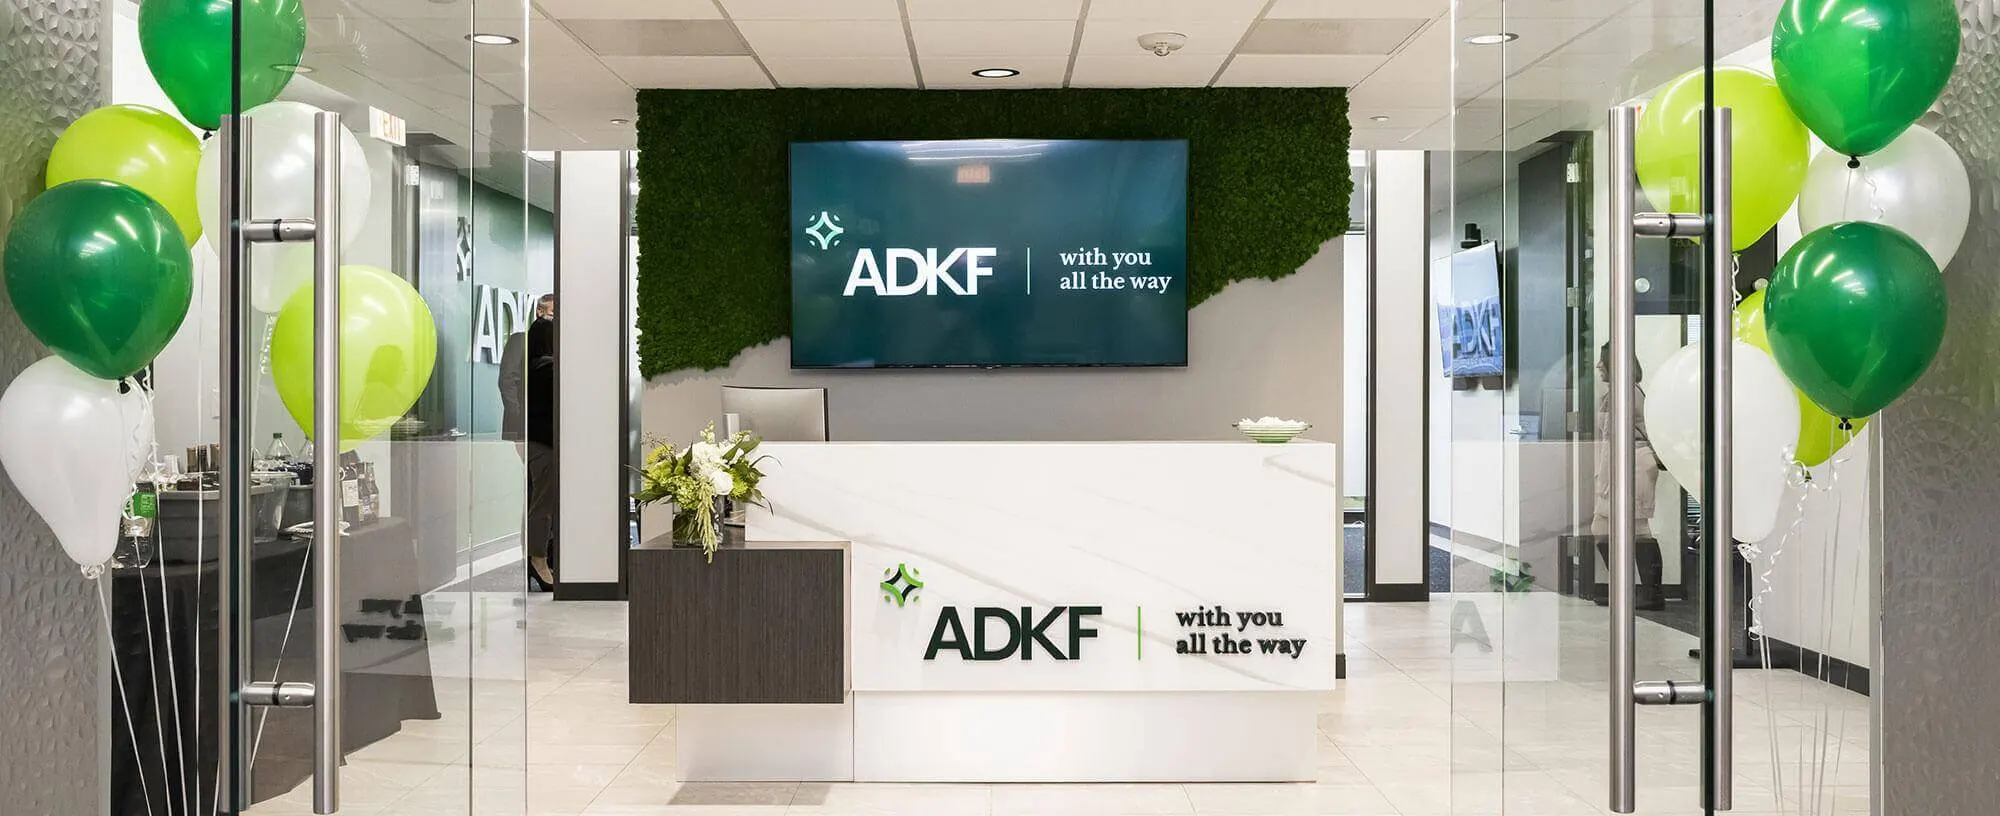 Boss Creative and ADKF Create A Stunning Office Makeover